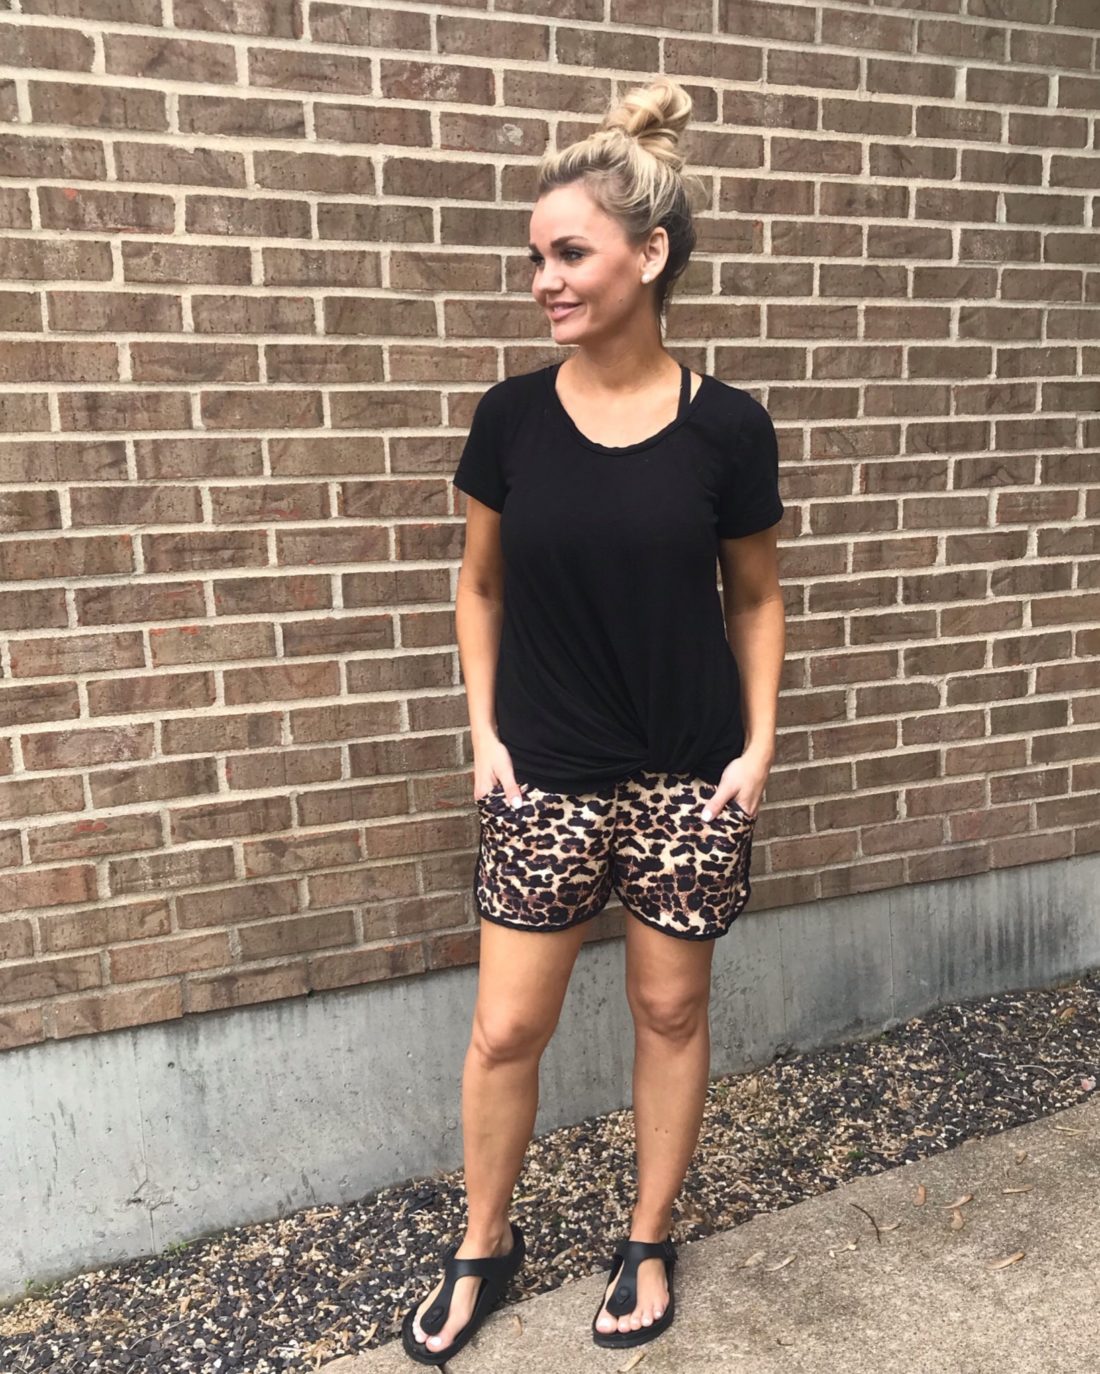 Amazon Summer Fashion Finds. Leopard shorts from Amazon.